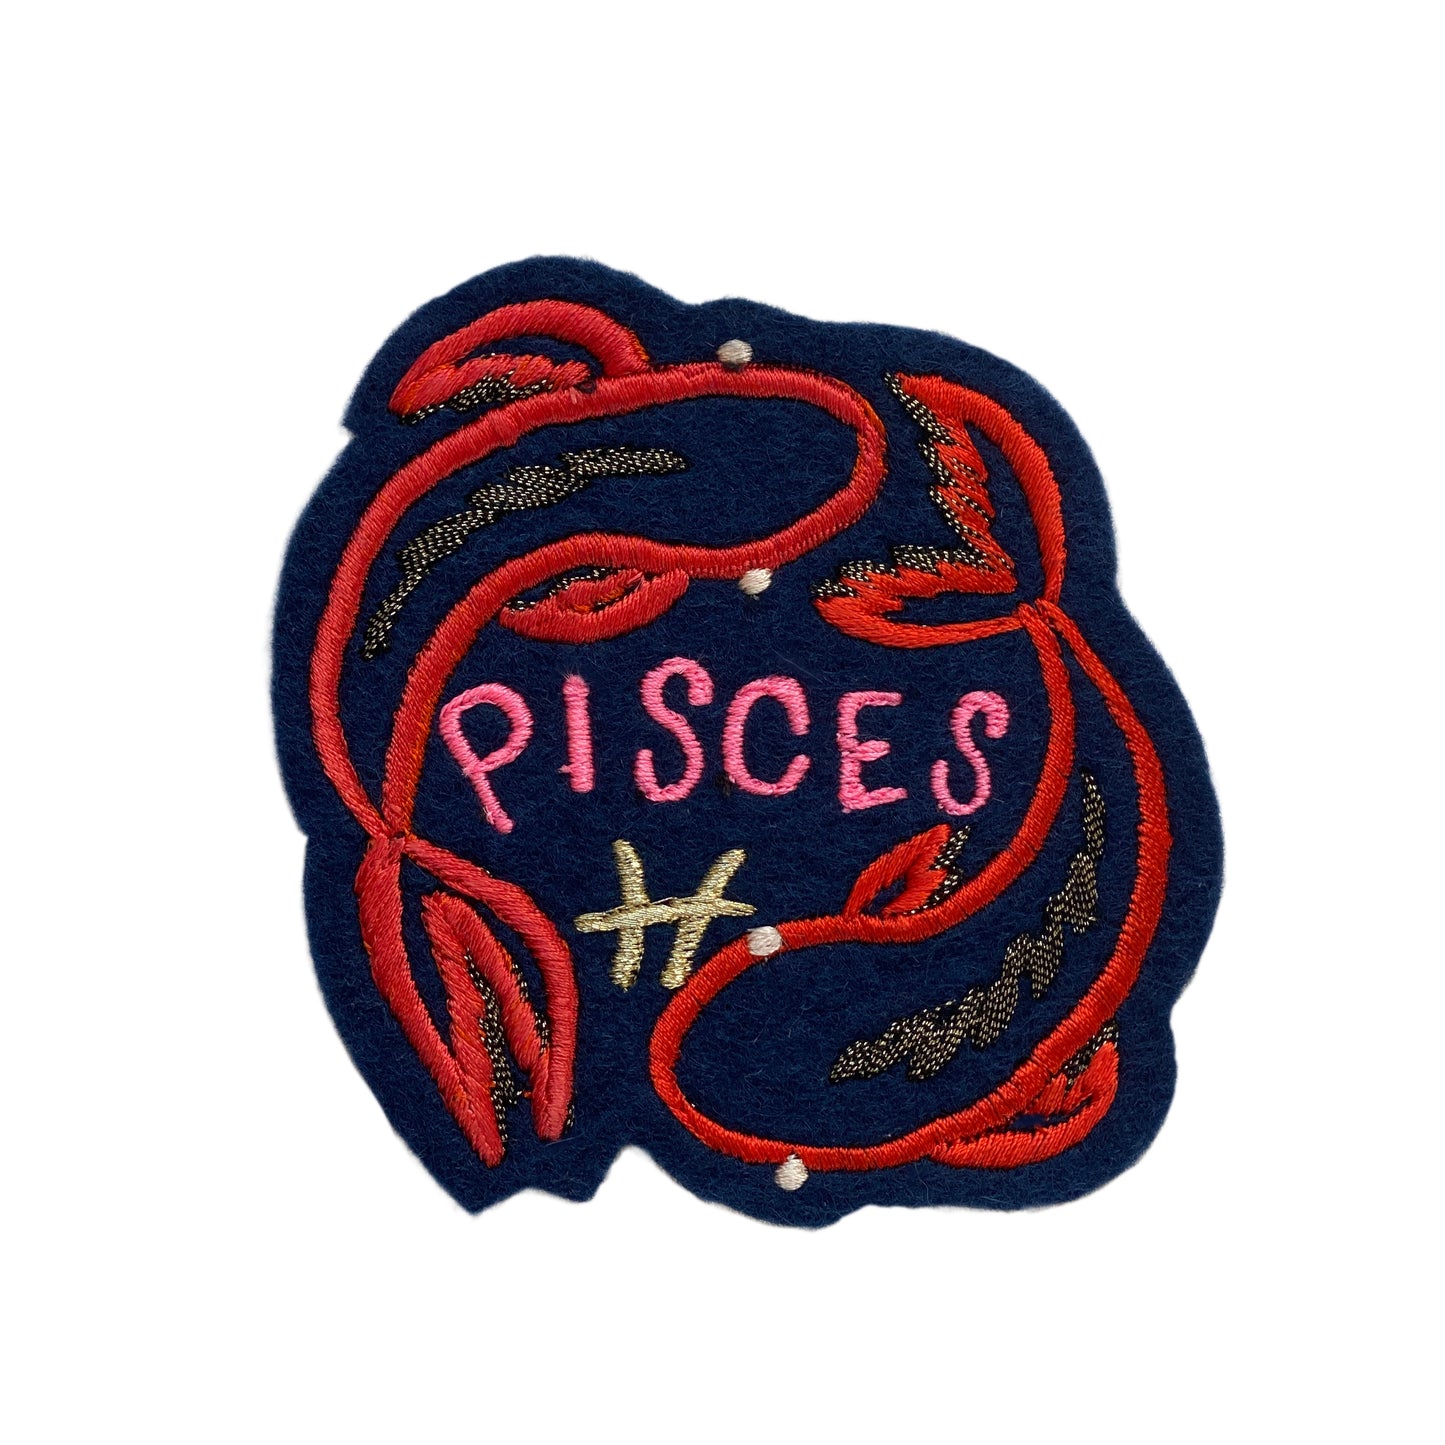 Pisces embroidered patch on white background